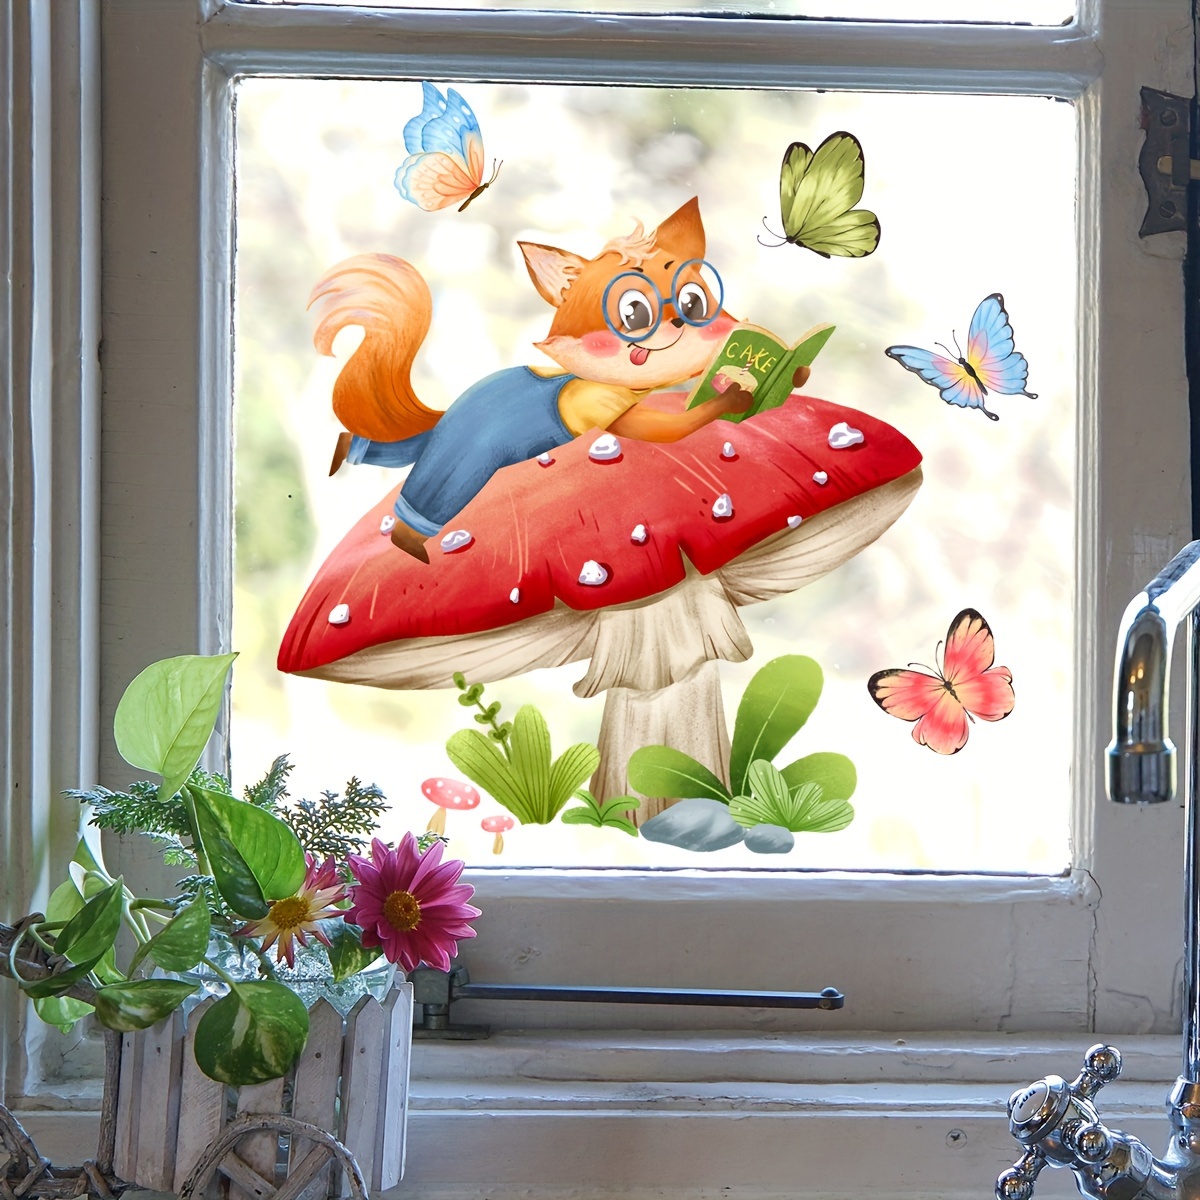 

1pc Cartoon Mushroom Fox With Musical Notes And Butterflies Window Cling, 30*25cm/11.81*9.84inch Plastic Bathroom Decals, Festive Wall Art For Room Decor